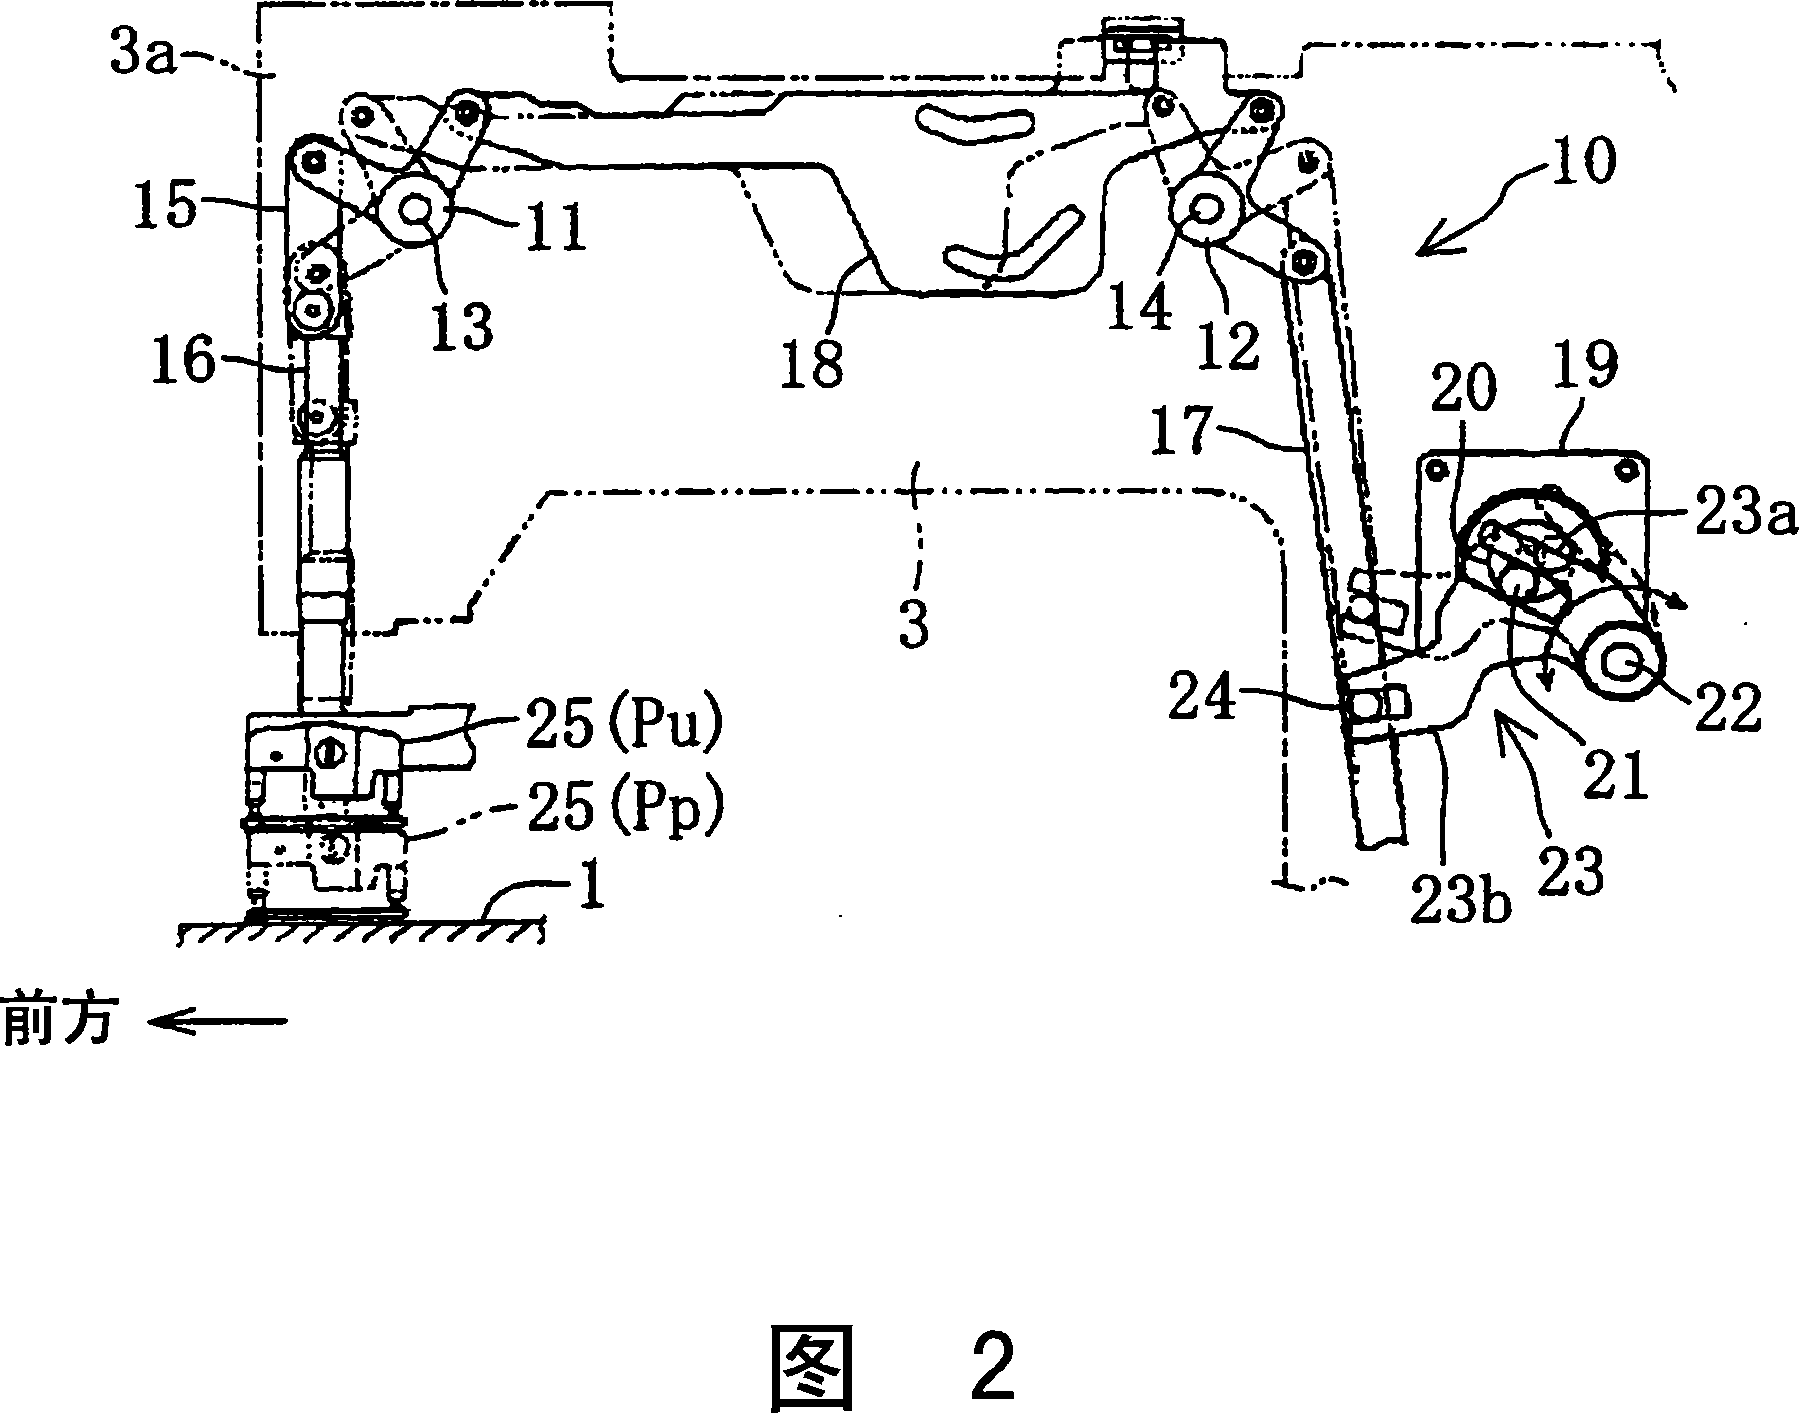 Thread adjusting device for sewing machine